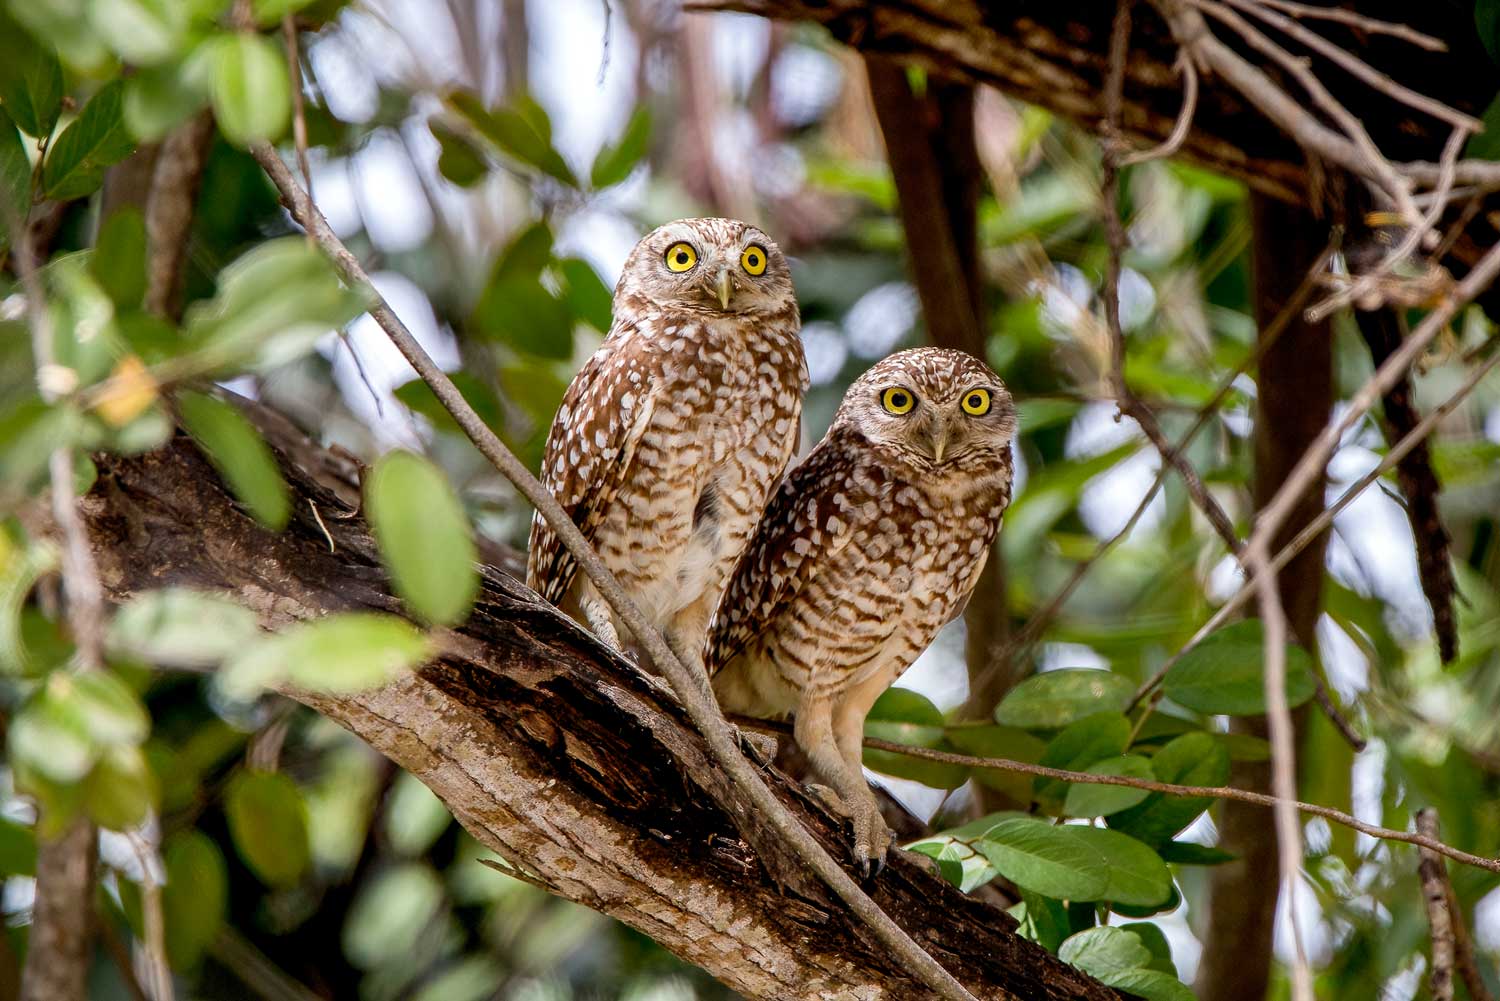 Two owls on a branch in the forest.